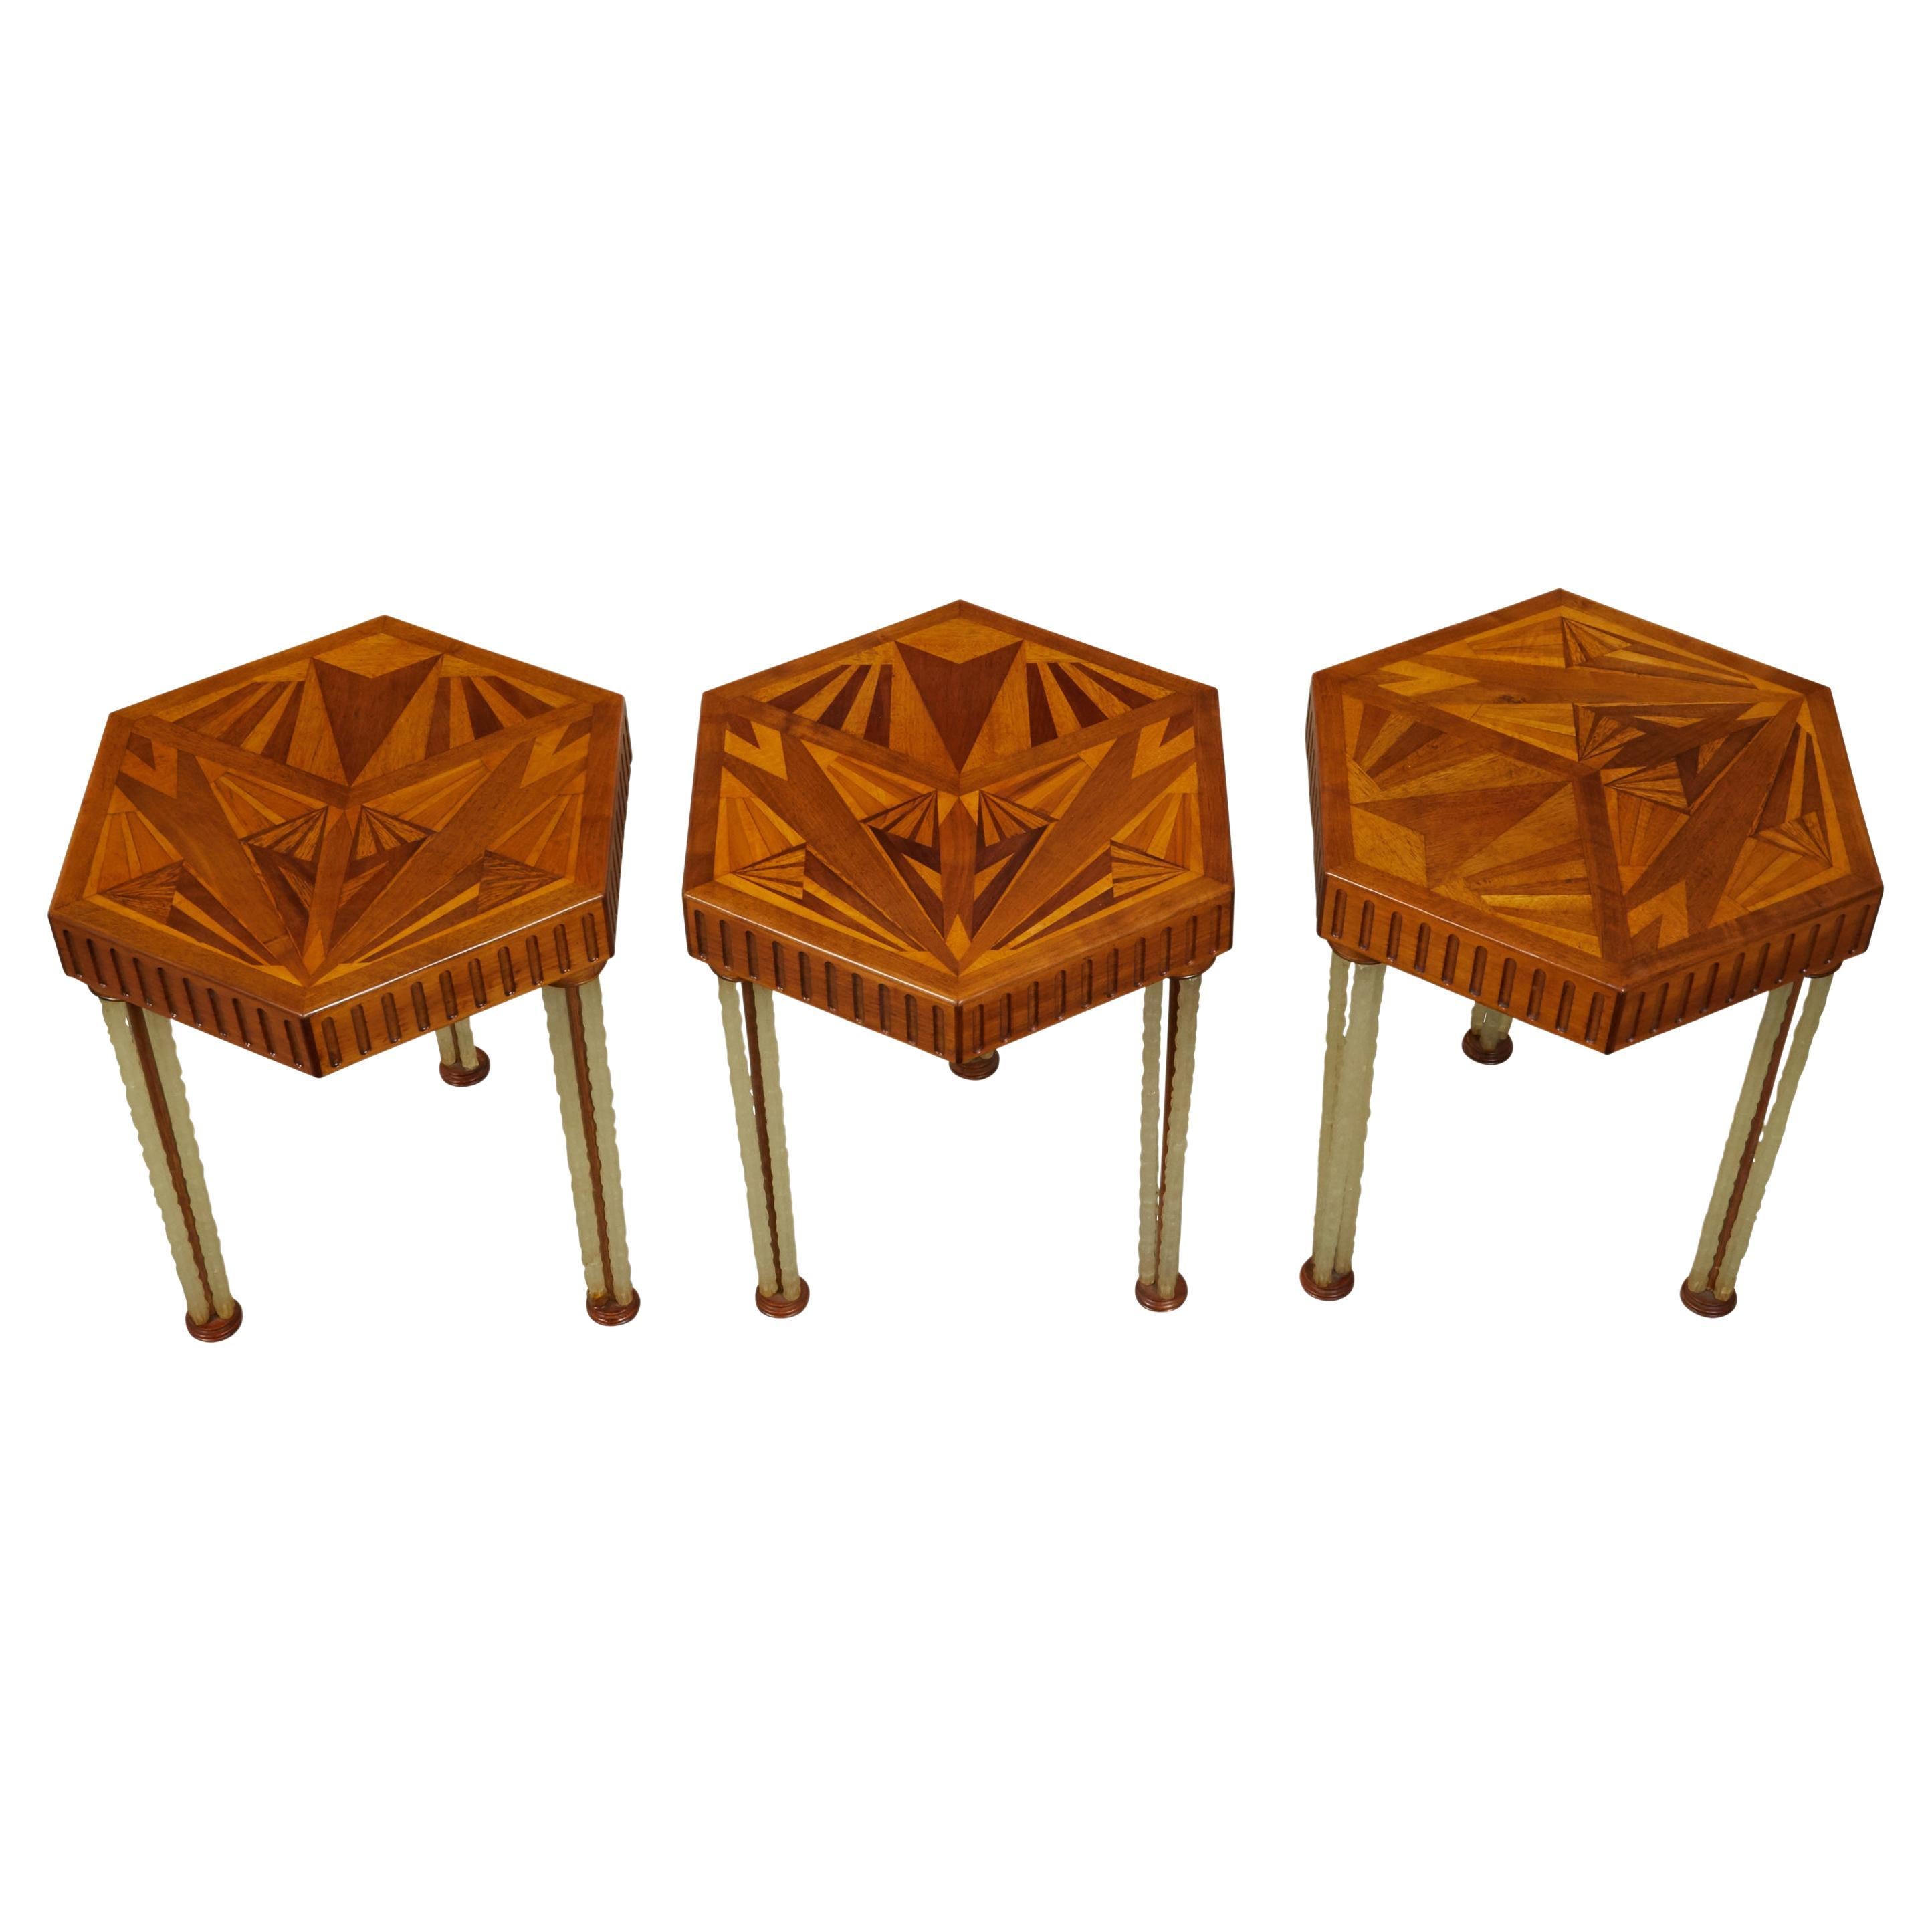 Art Deco 1930s Side Tables with Hexagonal Marquetry Tops and Lucite Legs For Sale